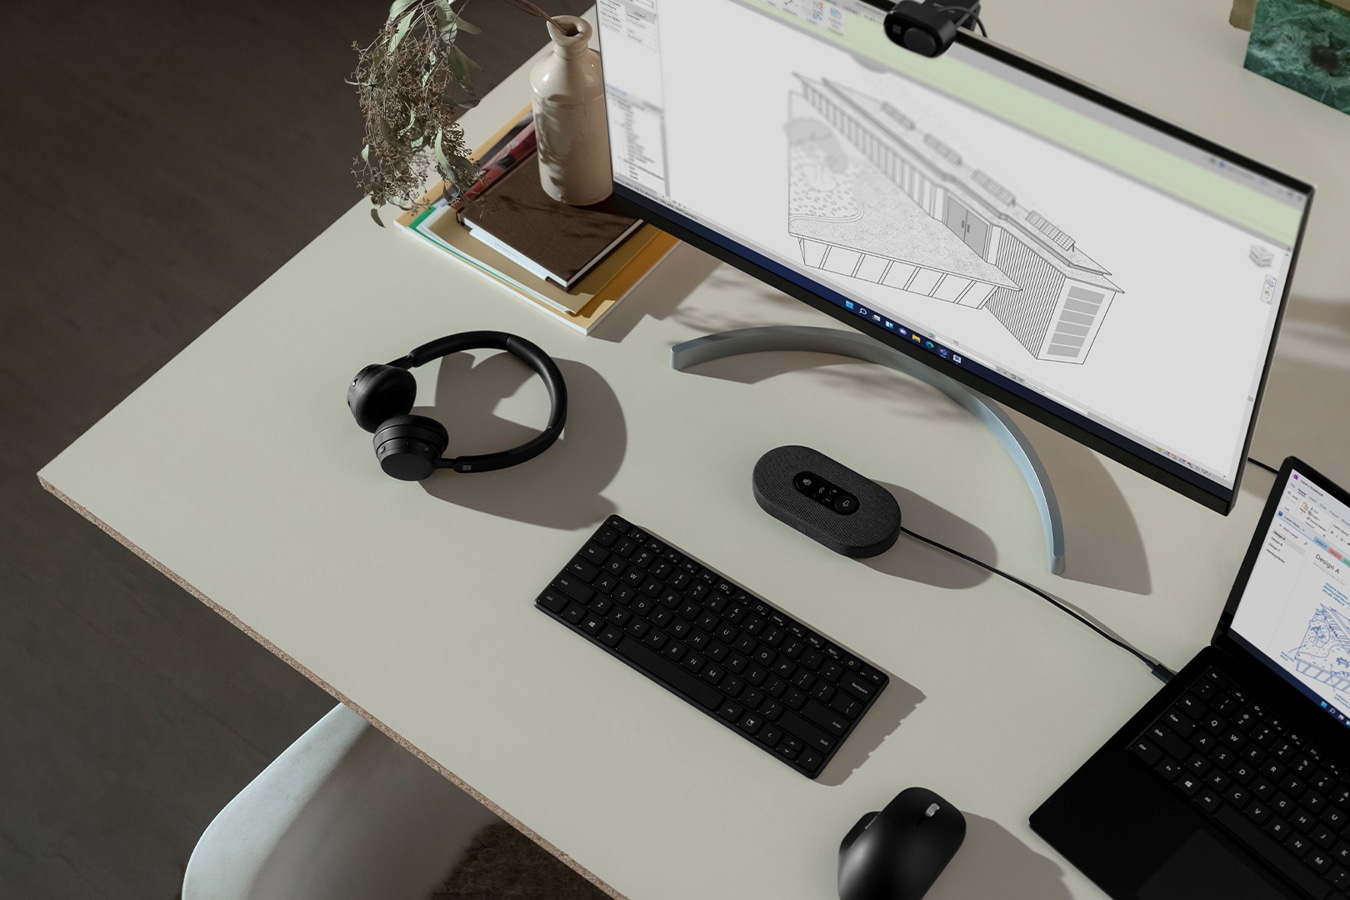 A Surface device is seen sitting on a desk connected to an external monitor with various Surface accessories nearby